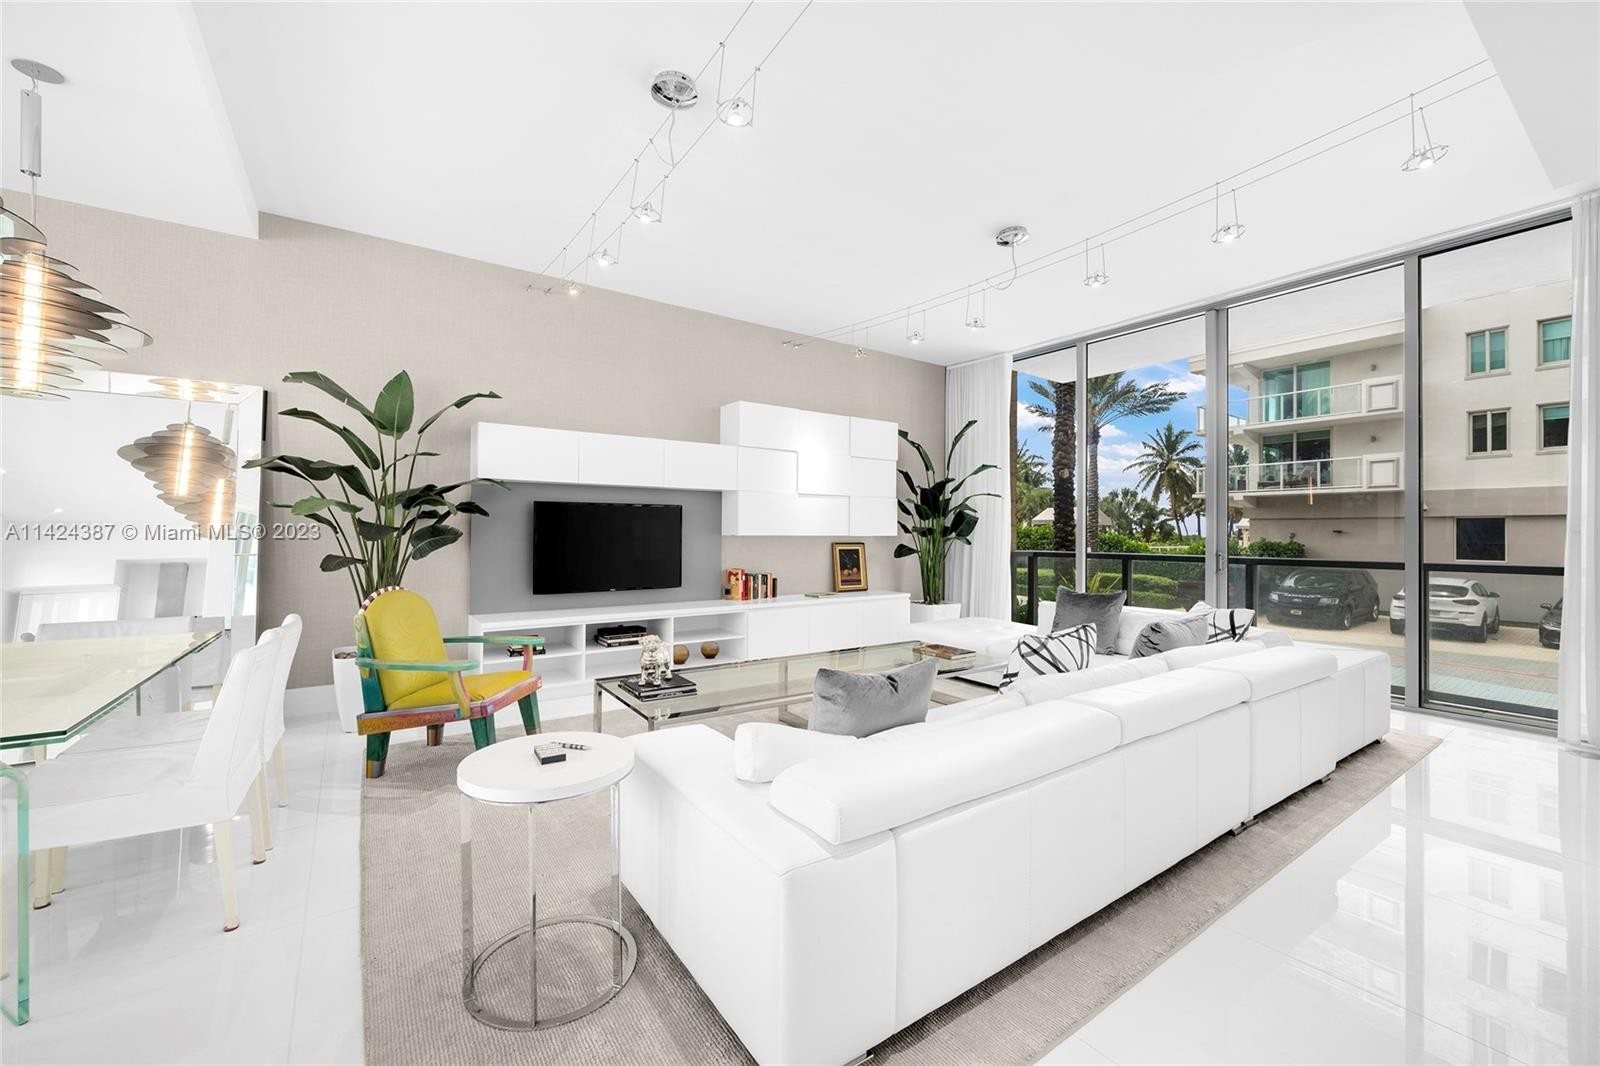 3. 9501 Collins Ave